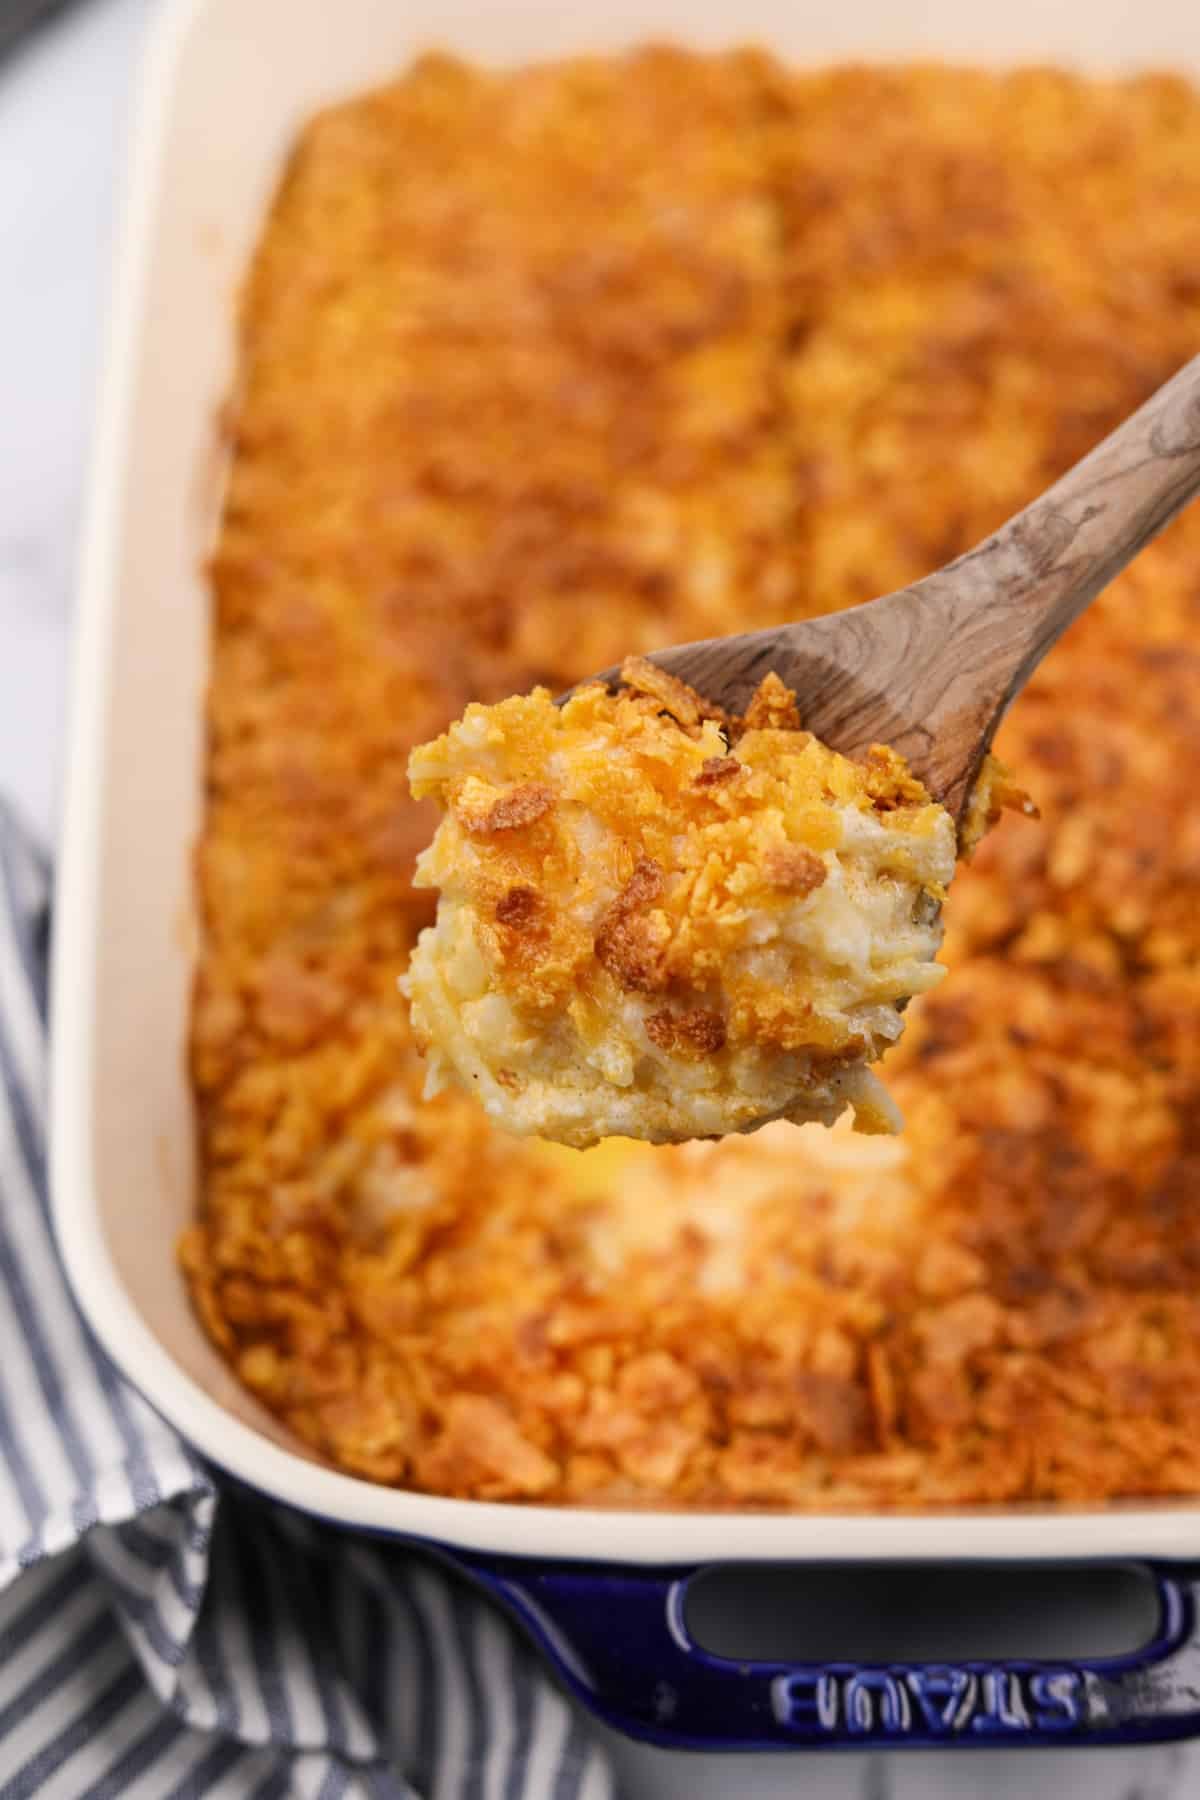 A scoop of hash brown casserole from a baking dish.